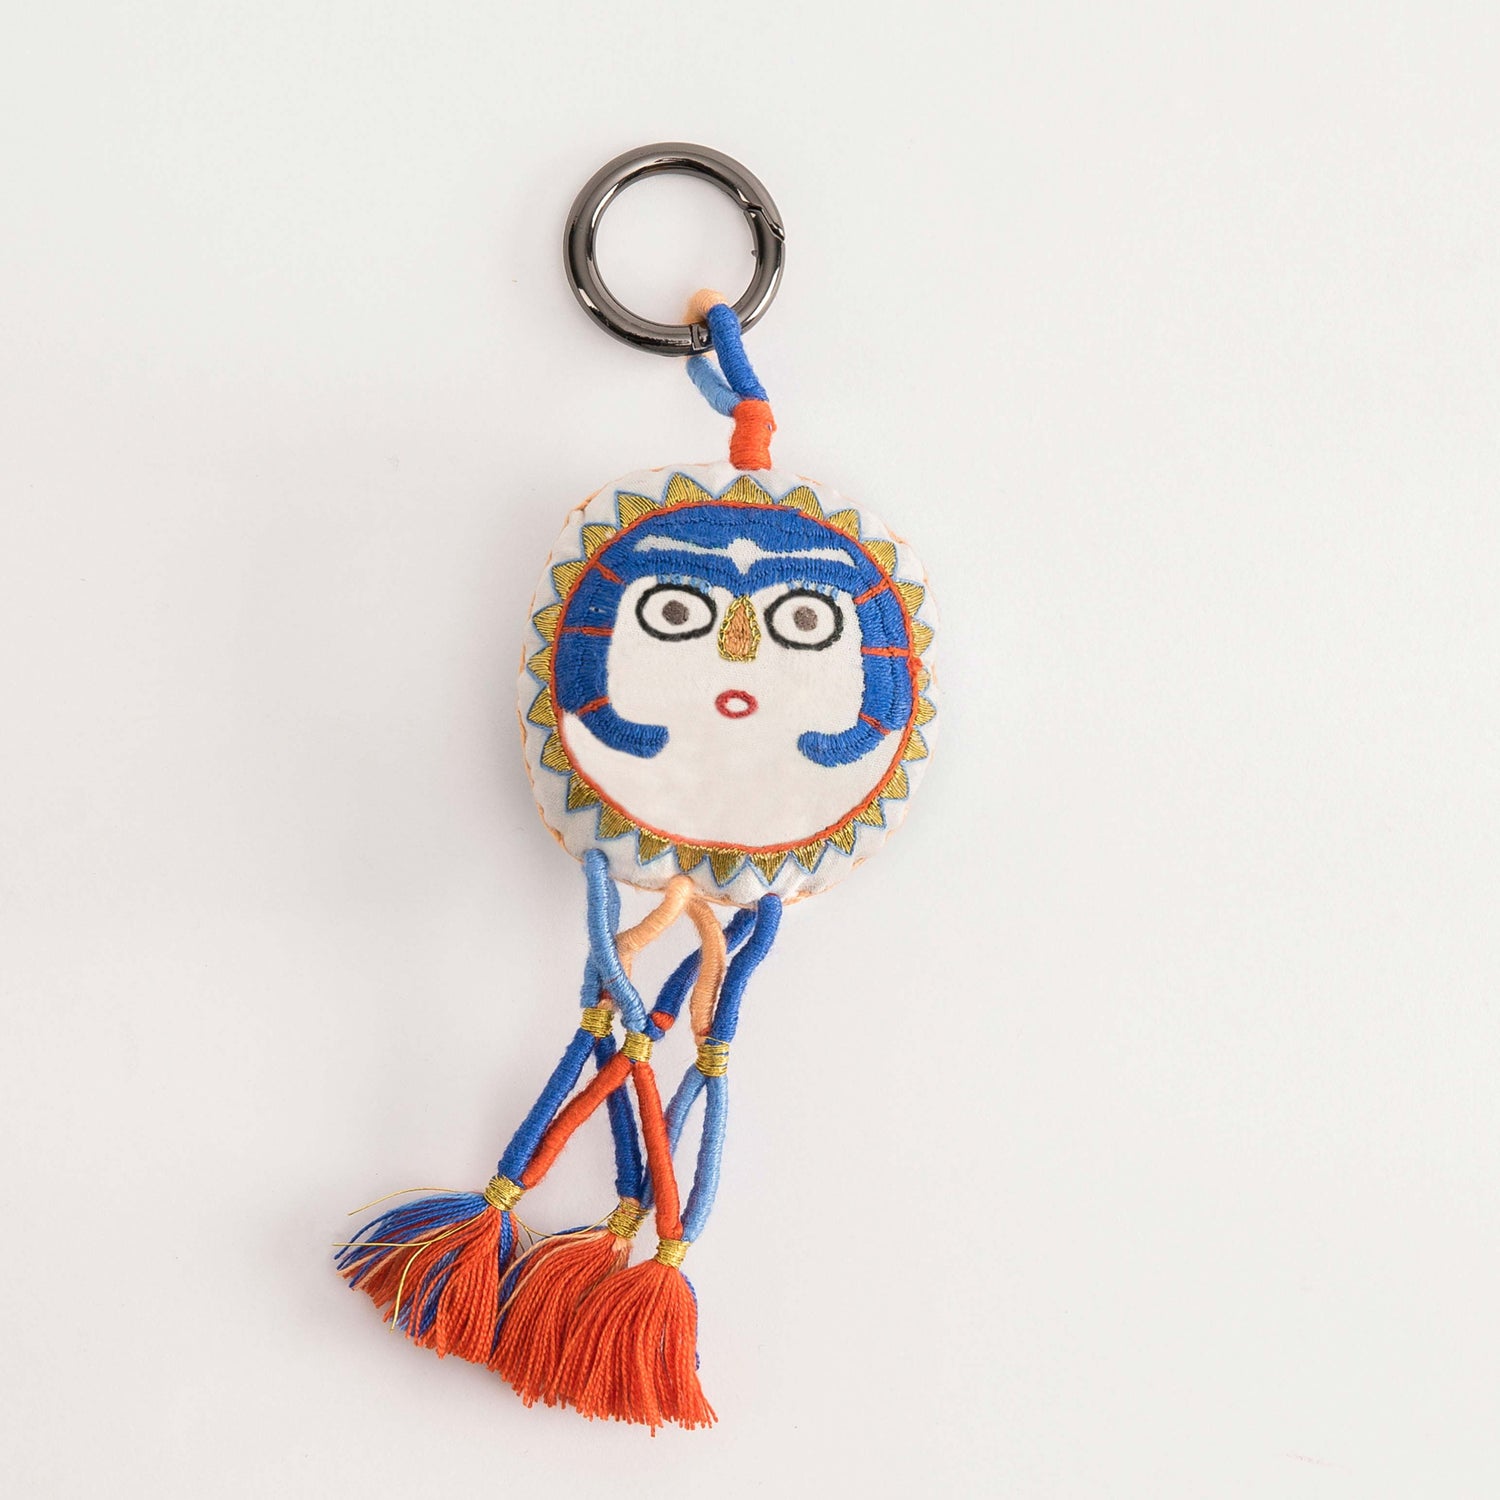 Nile blue Sunlady charm with embroidery and tassels